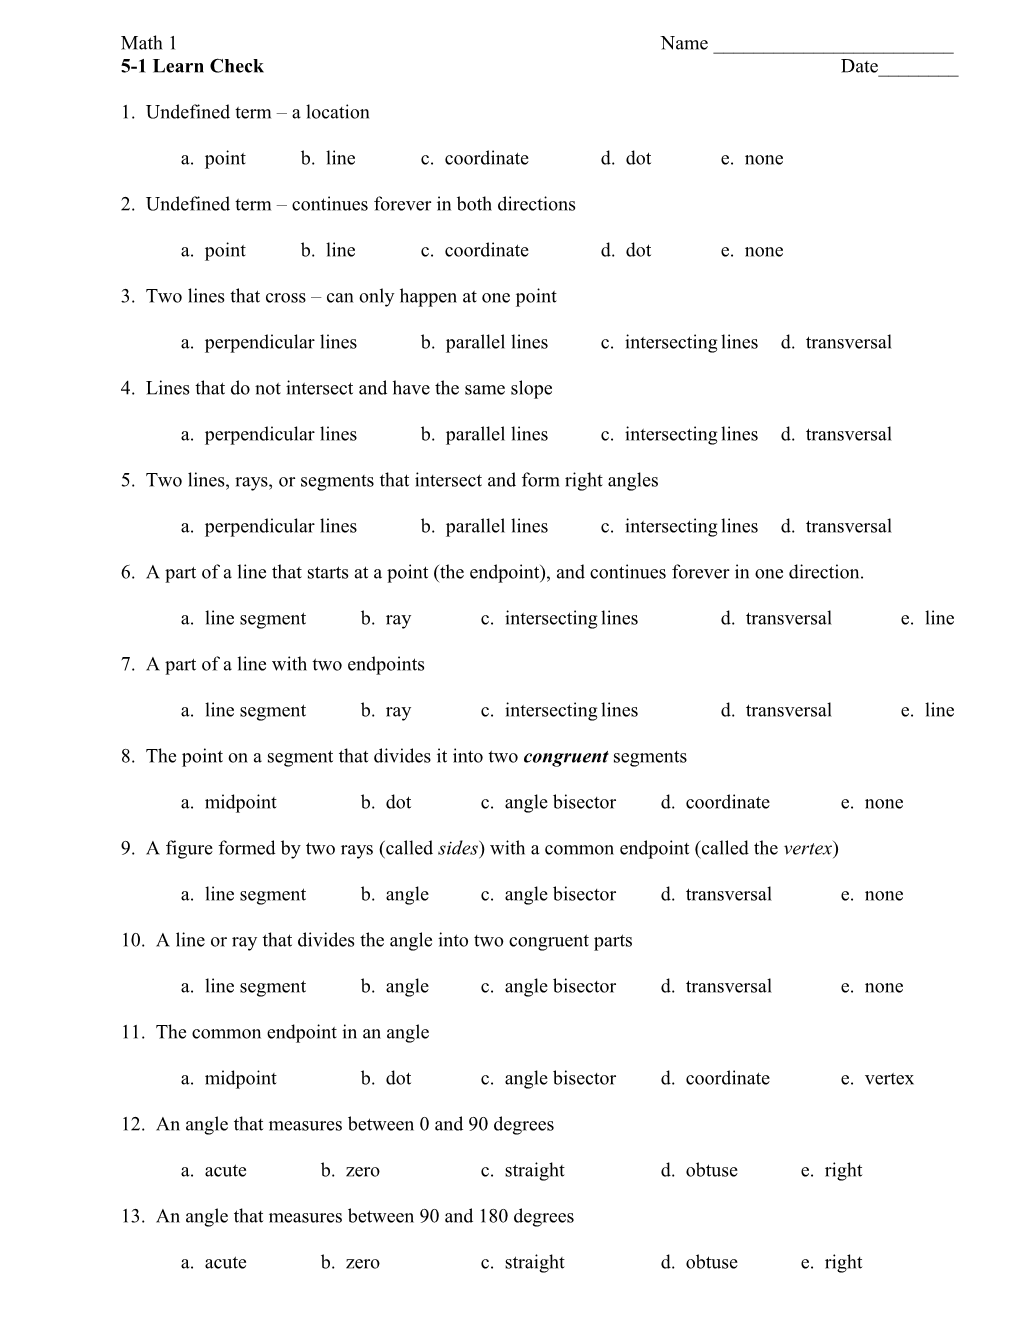 Math 1 Geometry Terms Learn Check